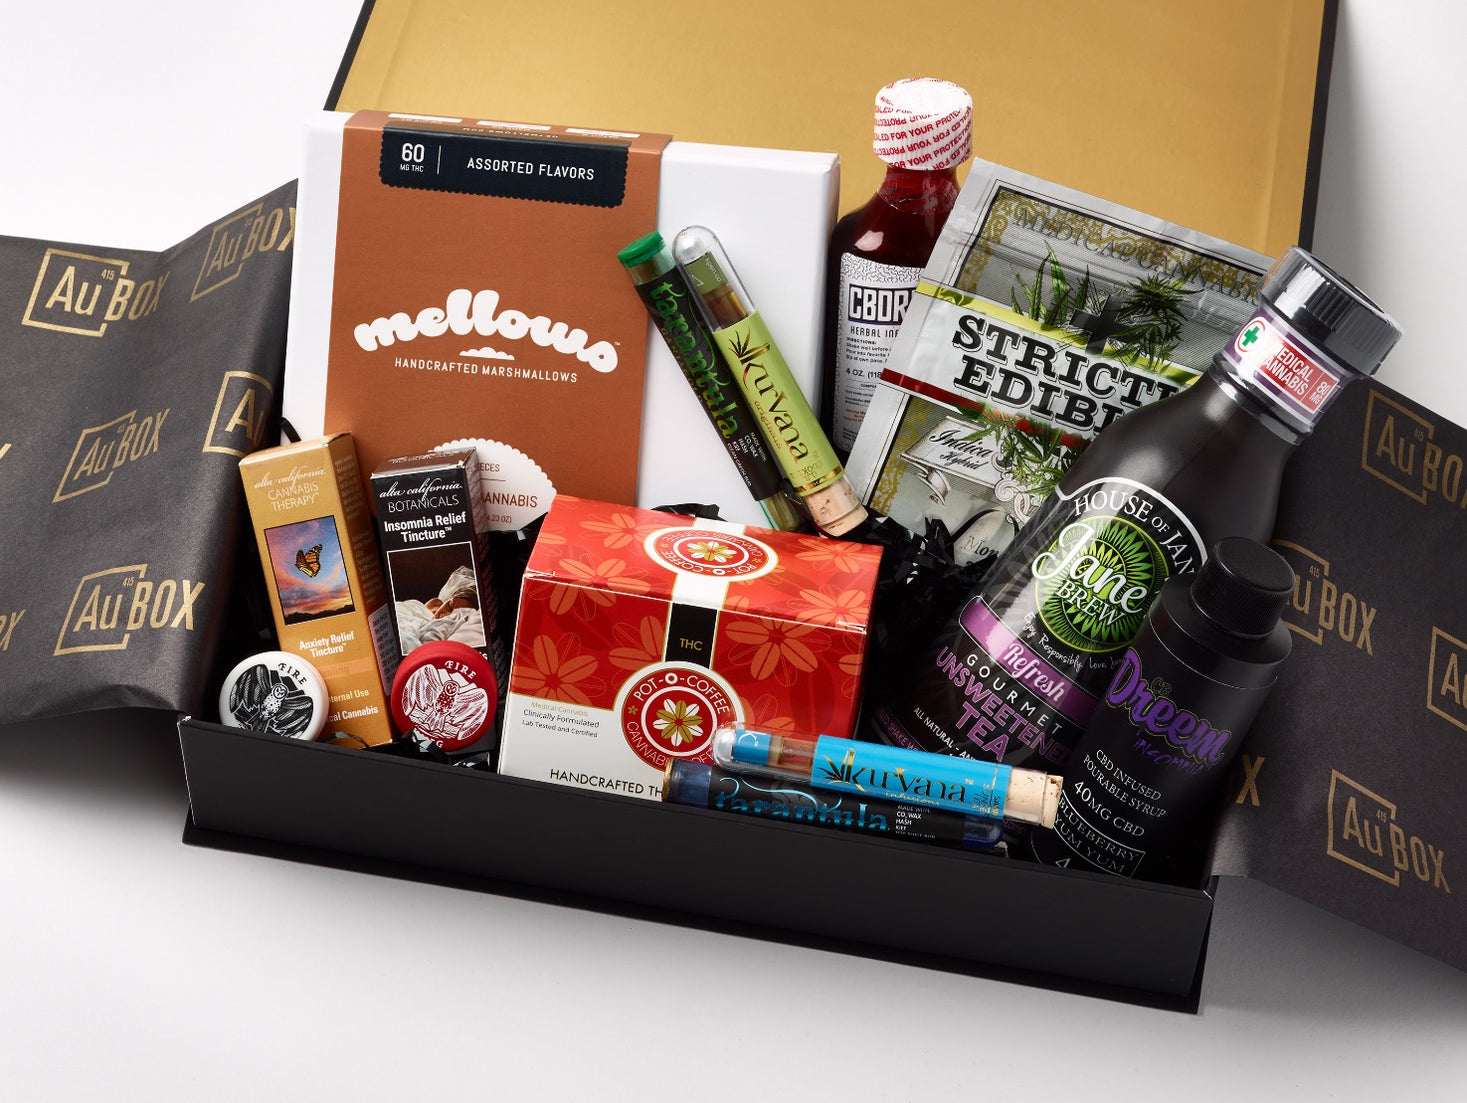 10 best cbd subscription box on the planet right now!